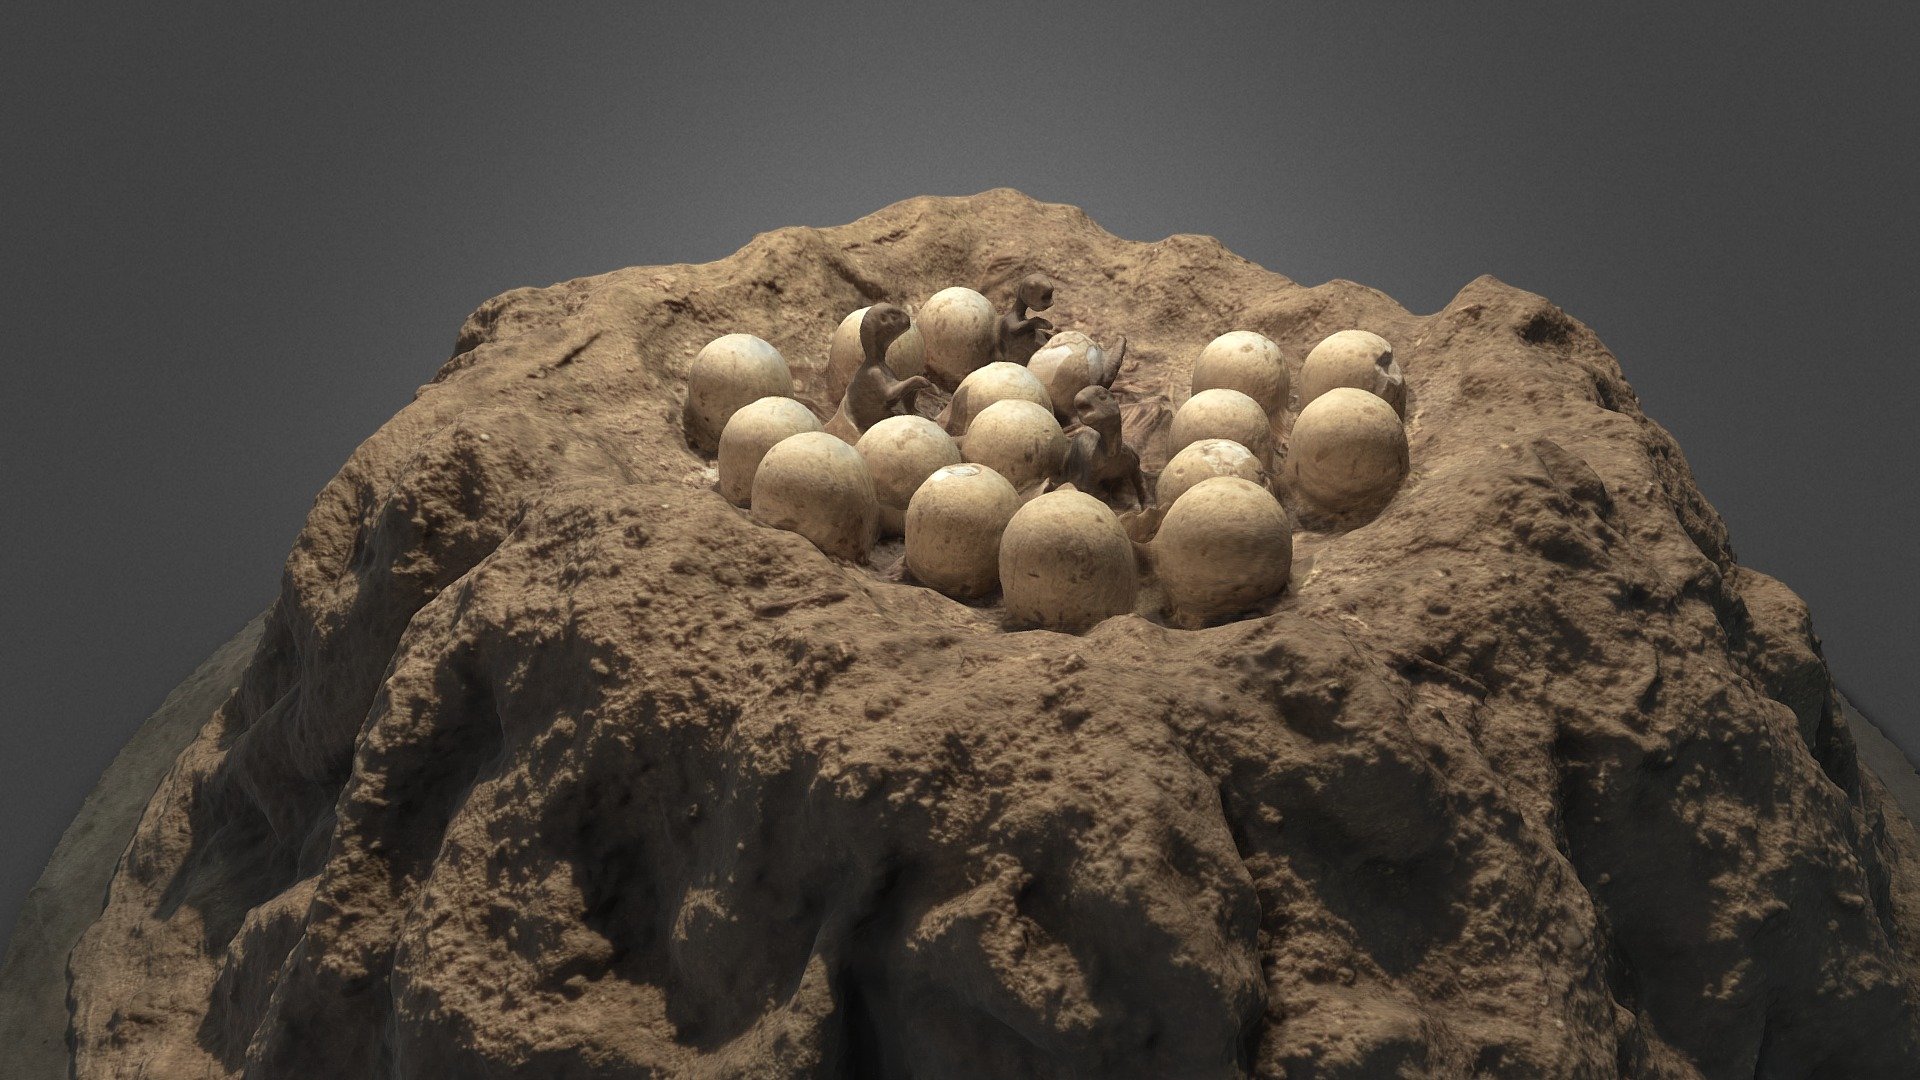 Maiasaura is one of the most famous examples of dinosaur nests and parental behaviour. This is a Museum model of what a nest with eggs and hatchlings might have looked like. 

See : https://www.nhm.ac.uk/discover/were-dinosaurs-good-parents.html - NEST DINOSAUR Maiasaura NHM LONDON 2020 - Download Free 3D model by Arqueomodel3D (@juanbrualla) 3d model